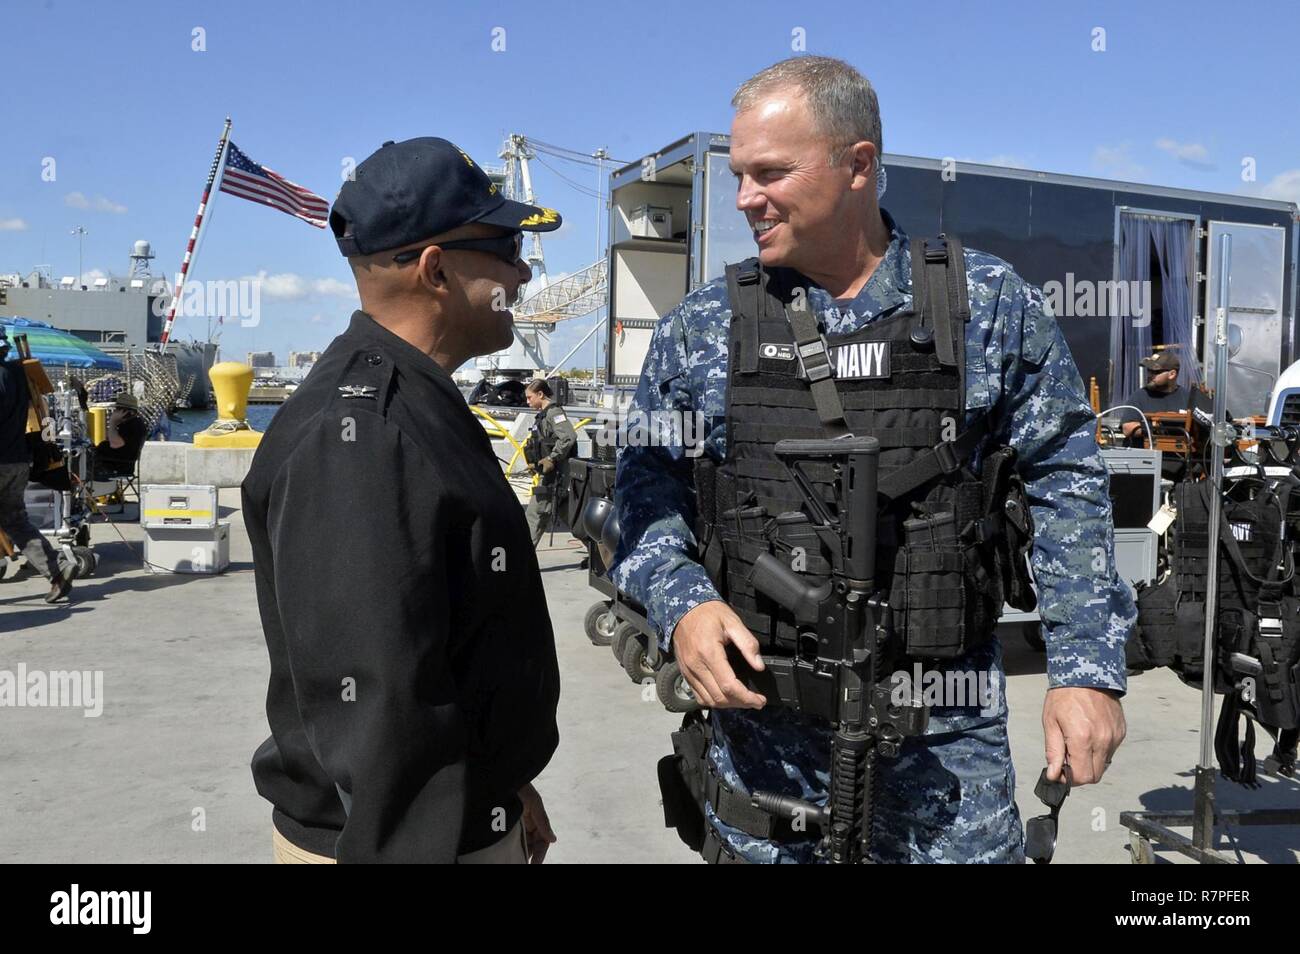 SAN DIEGO (March 23, 2017) Naval Base San Diego Commanding Officer Capt. Roy Love greets actor Adam Baldwin prior to the filming of the television show 'The Last Ship' on board the guided Stock Photo